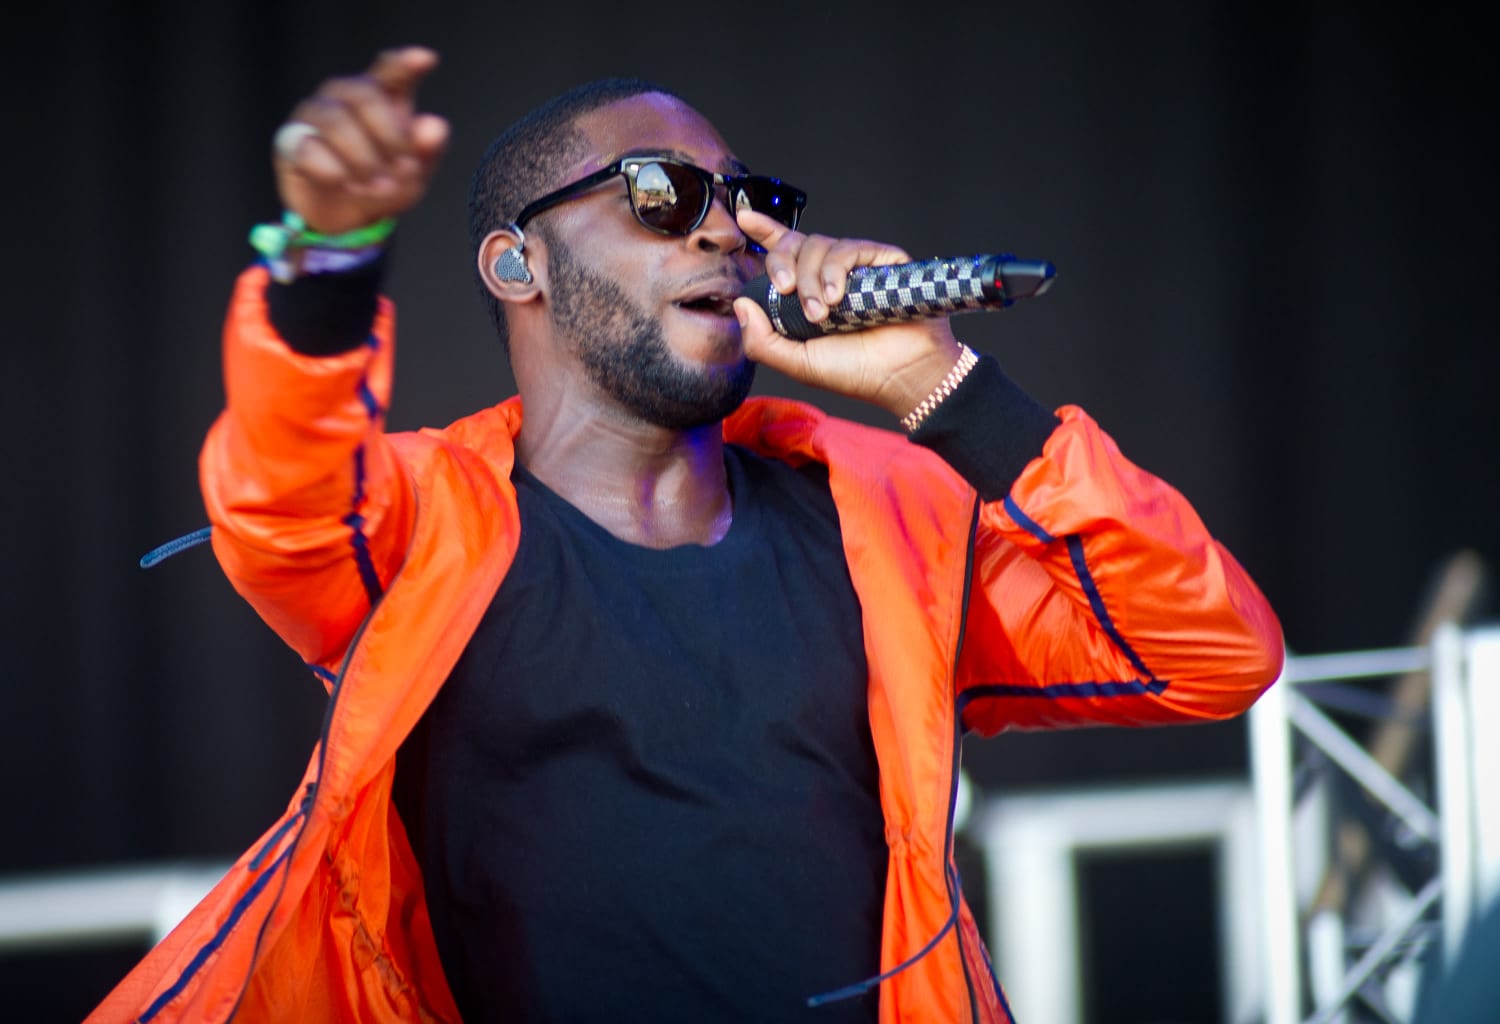 British rapper Tinie Tempah on racism: 'We want effective, permanent change'